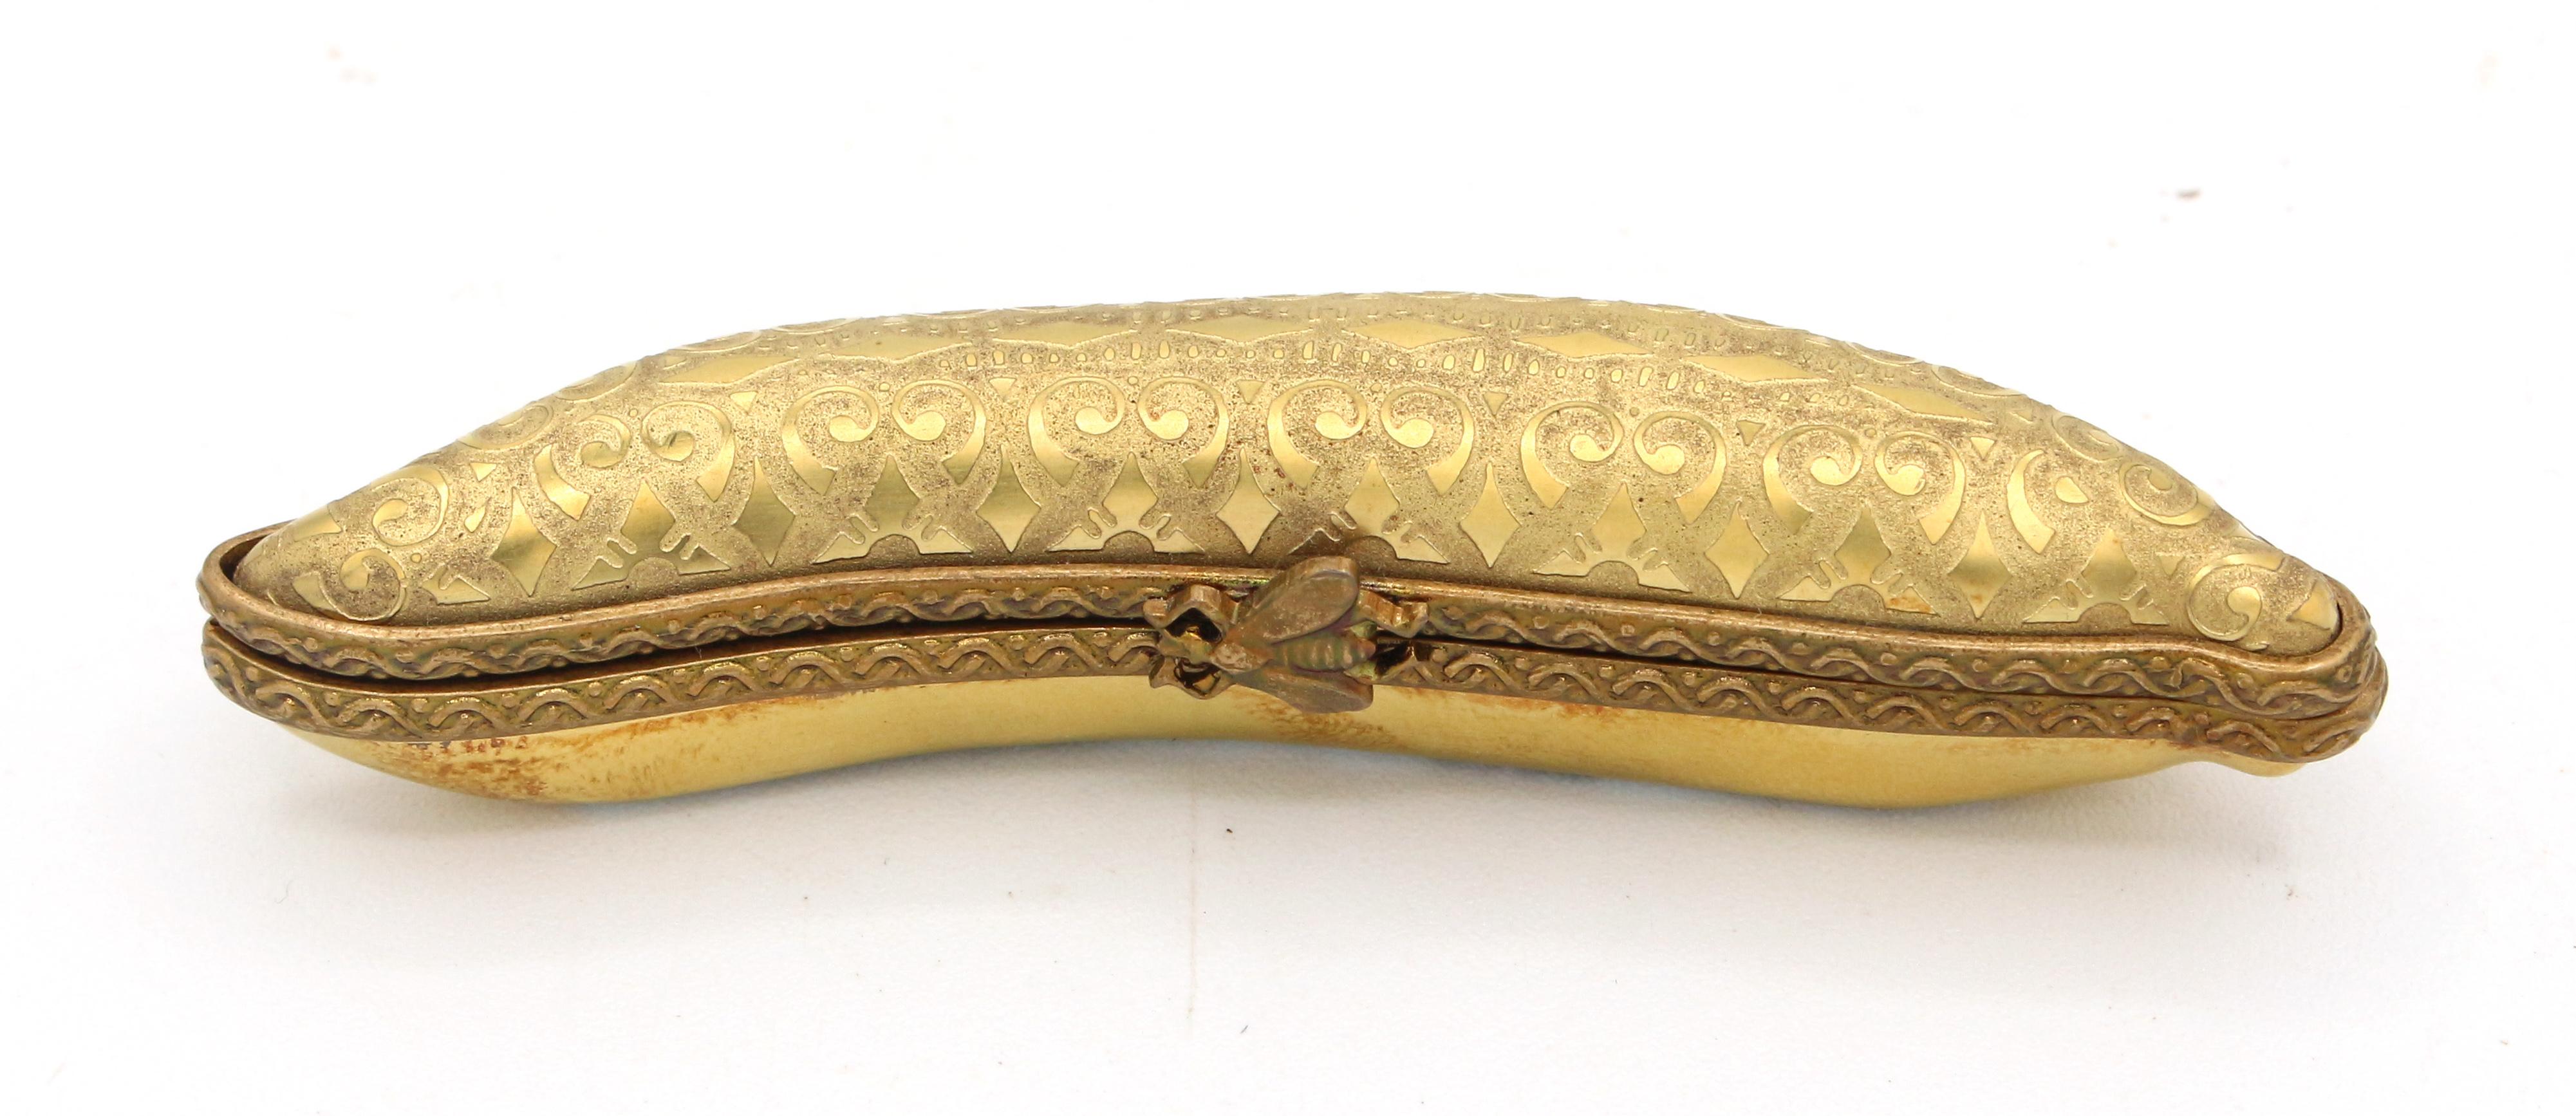 Limoges trinket box in the form five peas in a pod, French later 20th century. Bee clasp. Marked: Limoges France, Porcelaine D'Art Du Cruou, MCLS.
3 1/8